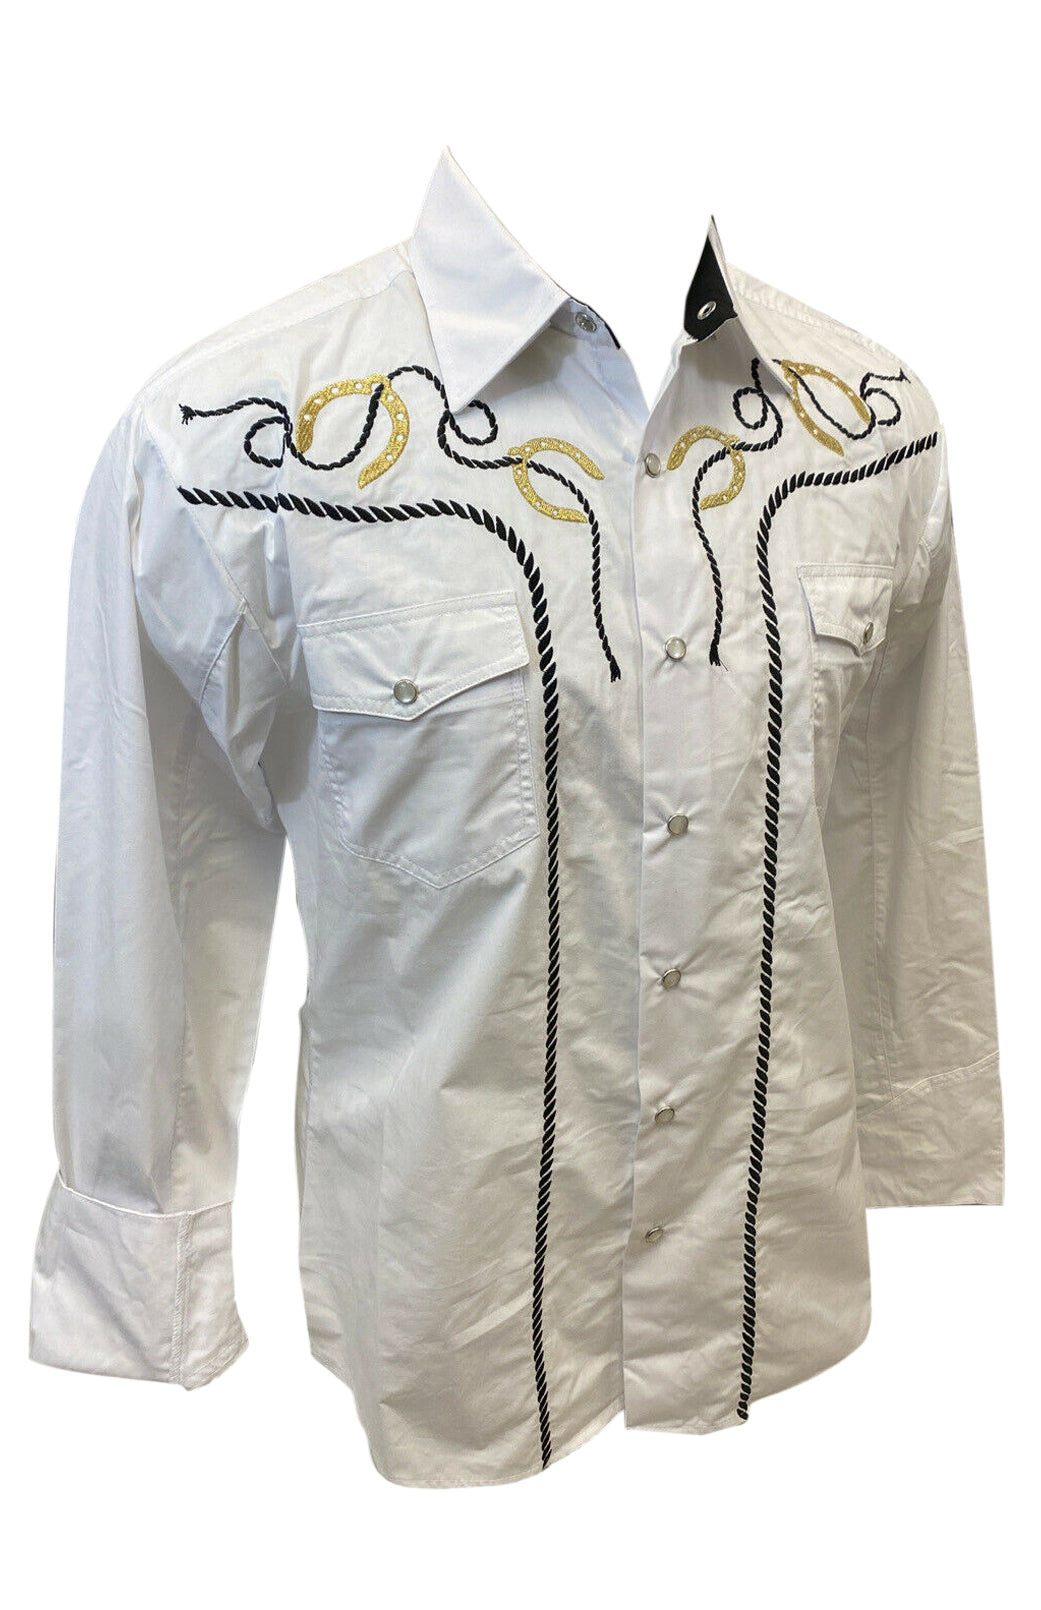 Men RODEO WESTERN COUNTRY WHITE GOLD BLACK ROPE HORSESHOE TRIBAL LUCKY LASSO Shirt Cowboy